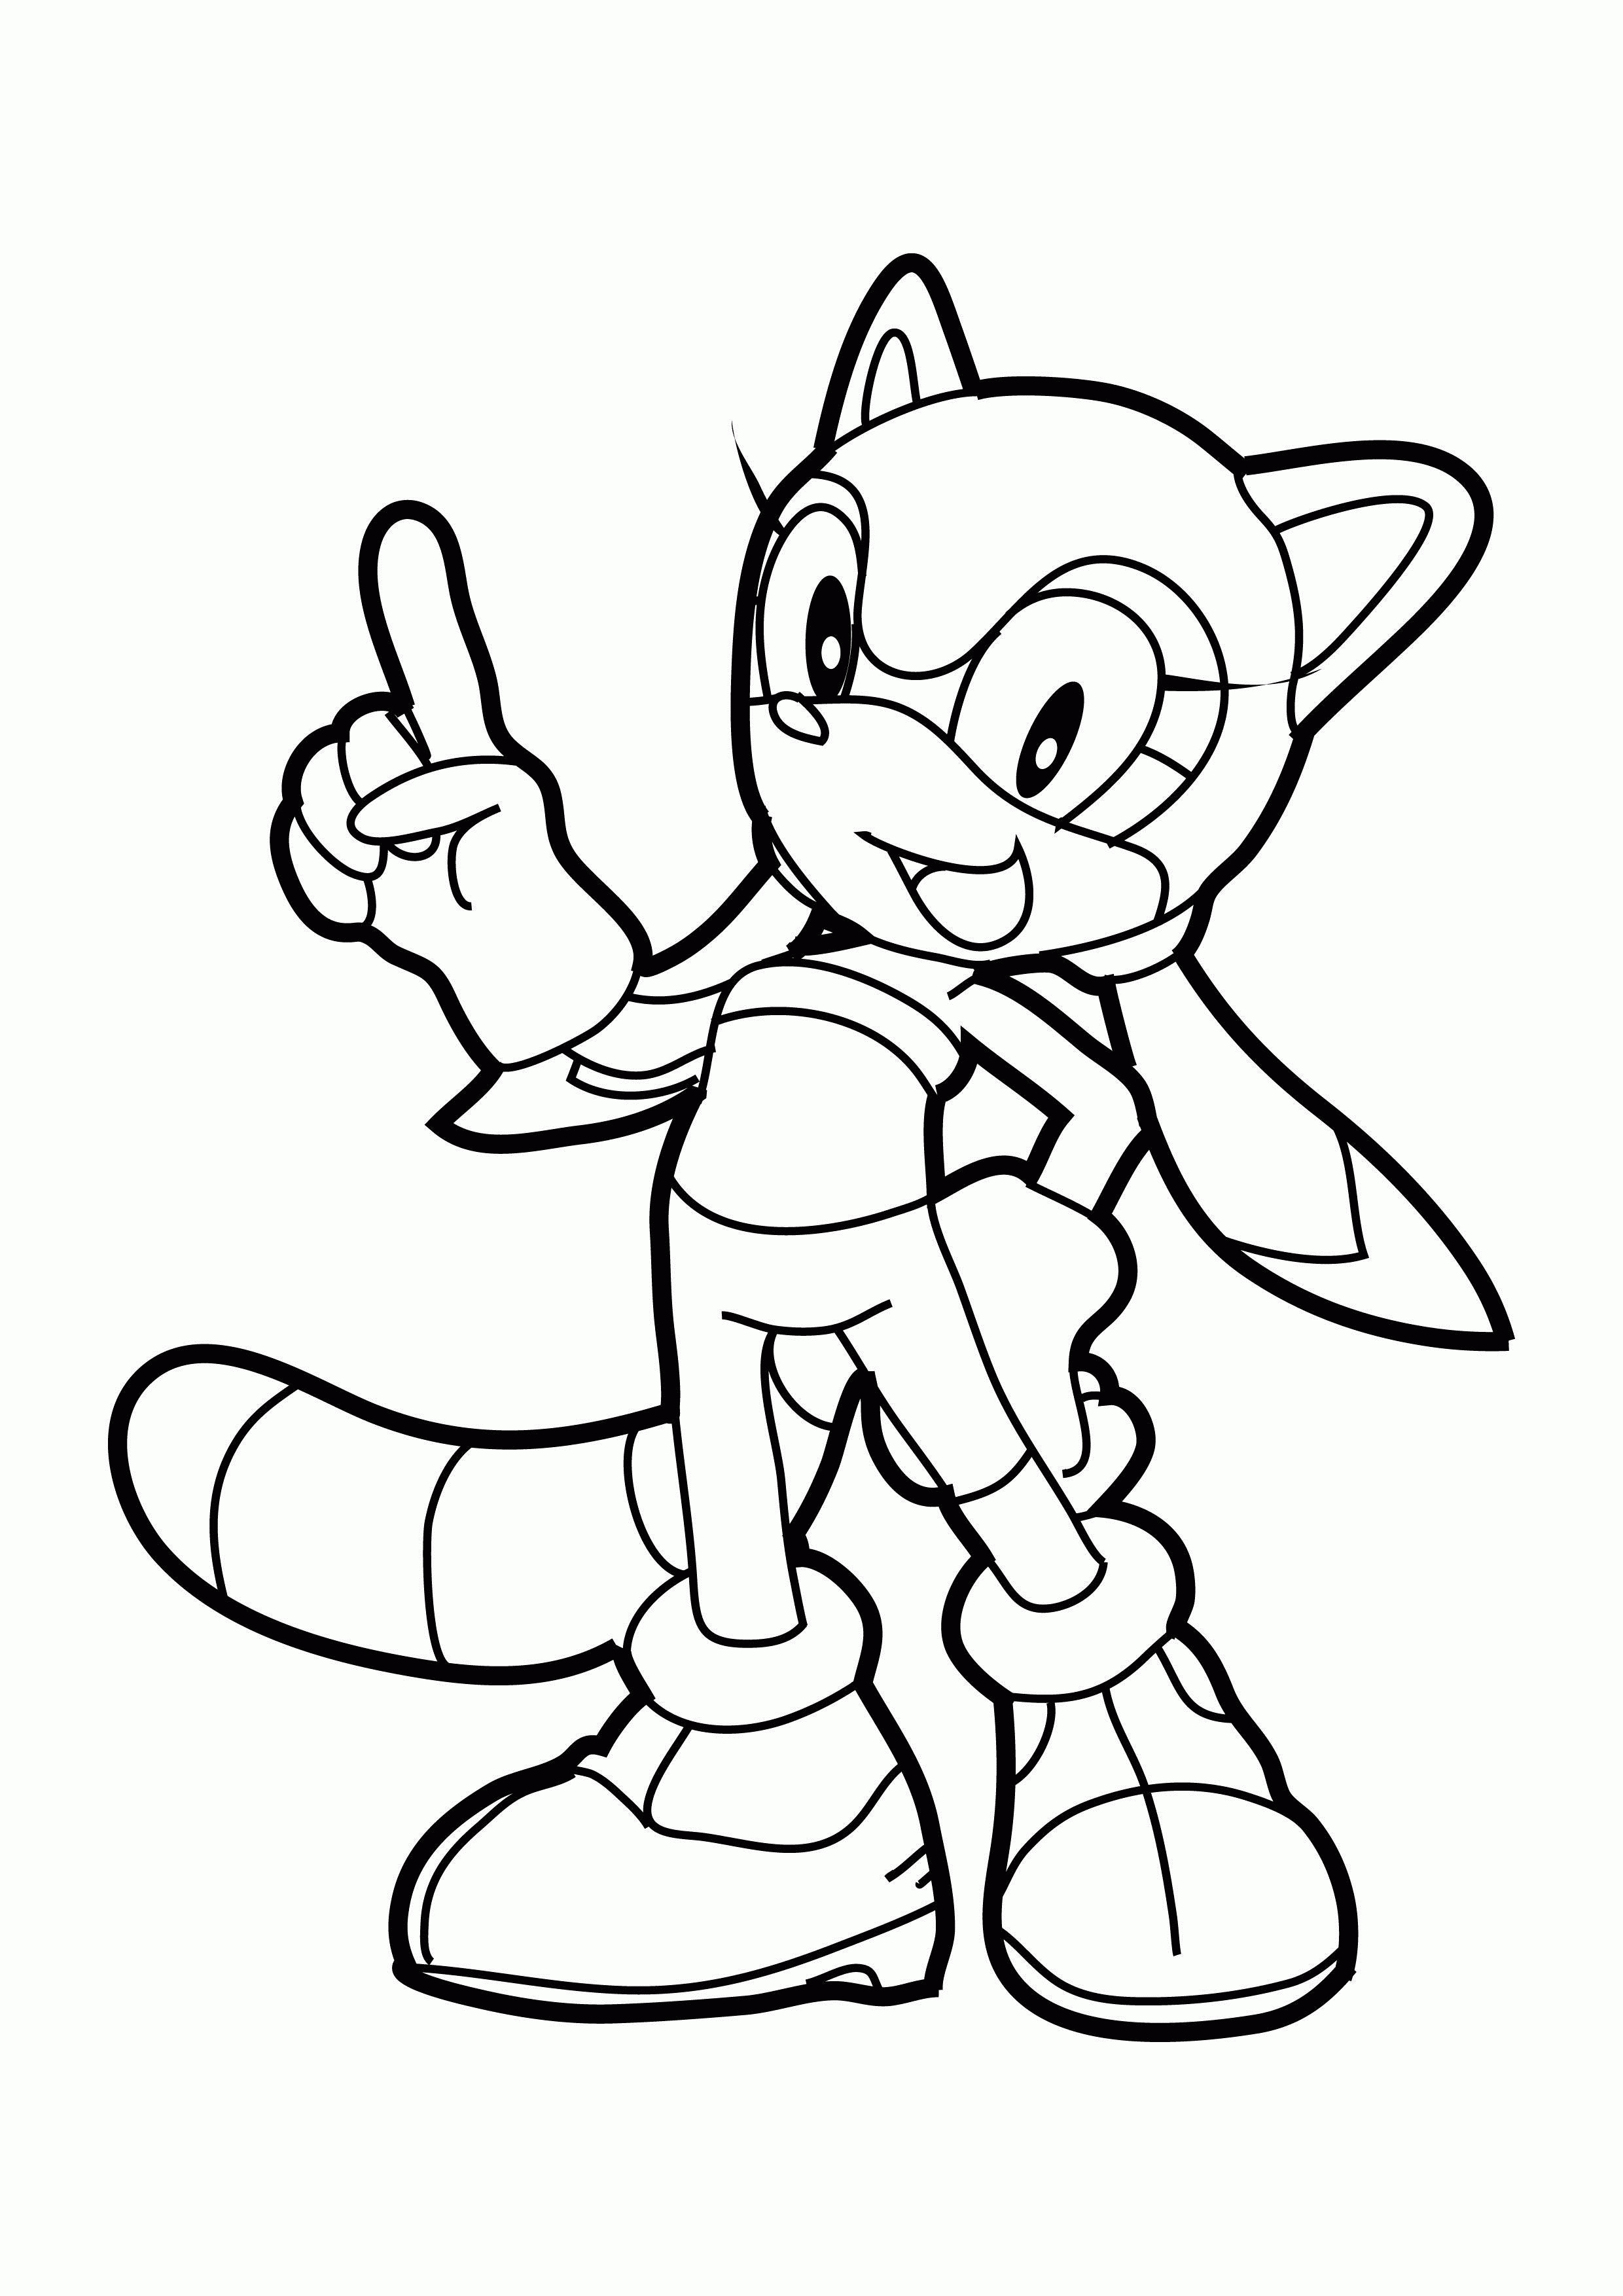 free-sonic-coloring-pages-knuckles-download-free-sonic-coloring-pages